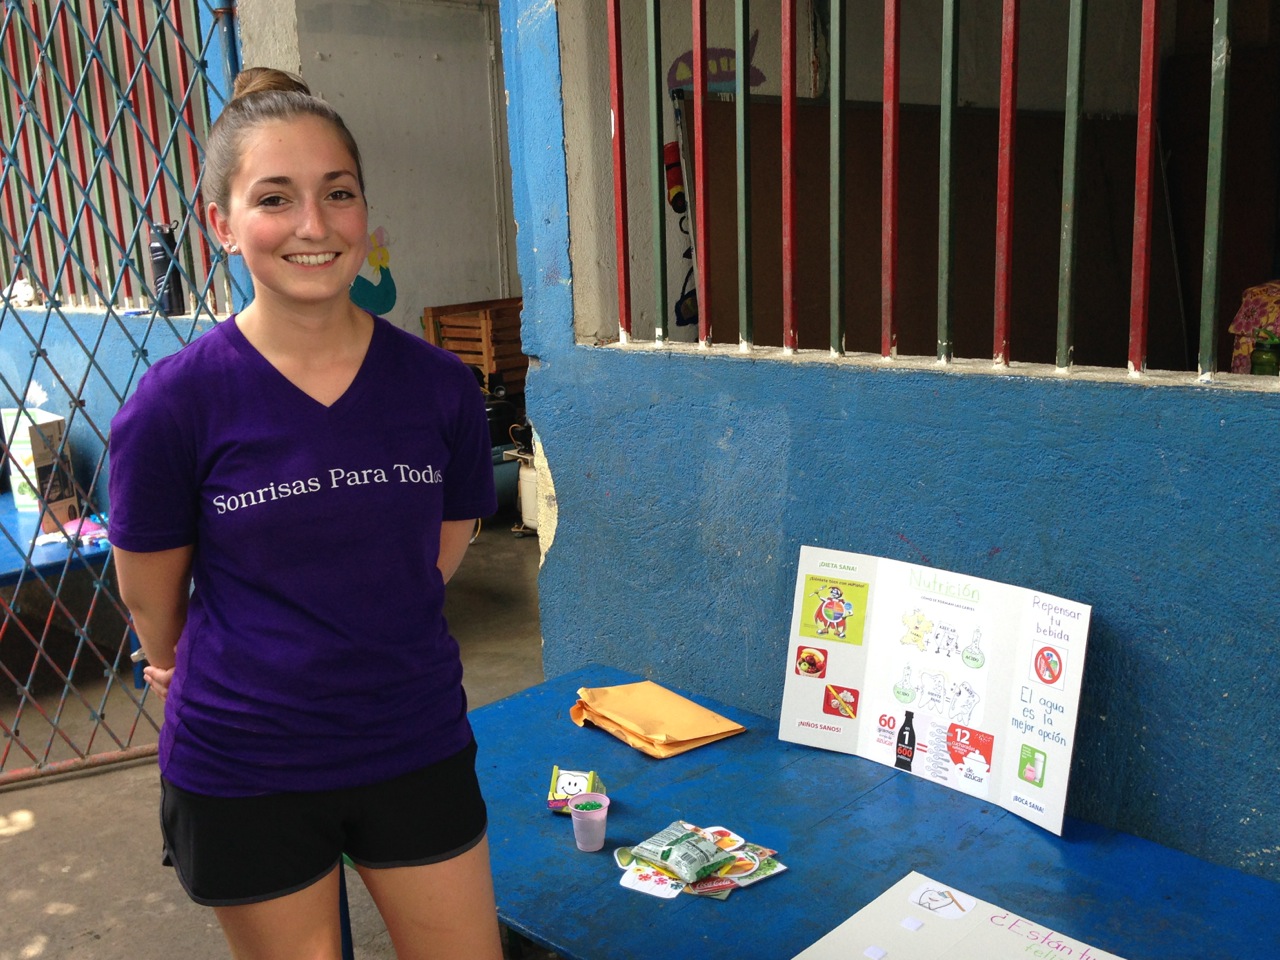 Claudia N. Naylor staffs a display on nutrition and oral health during a community health fair.